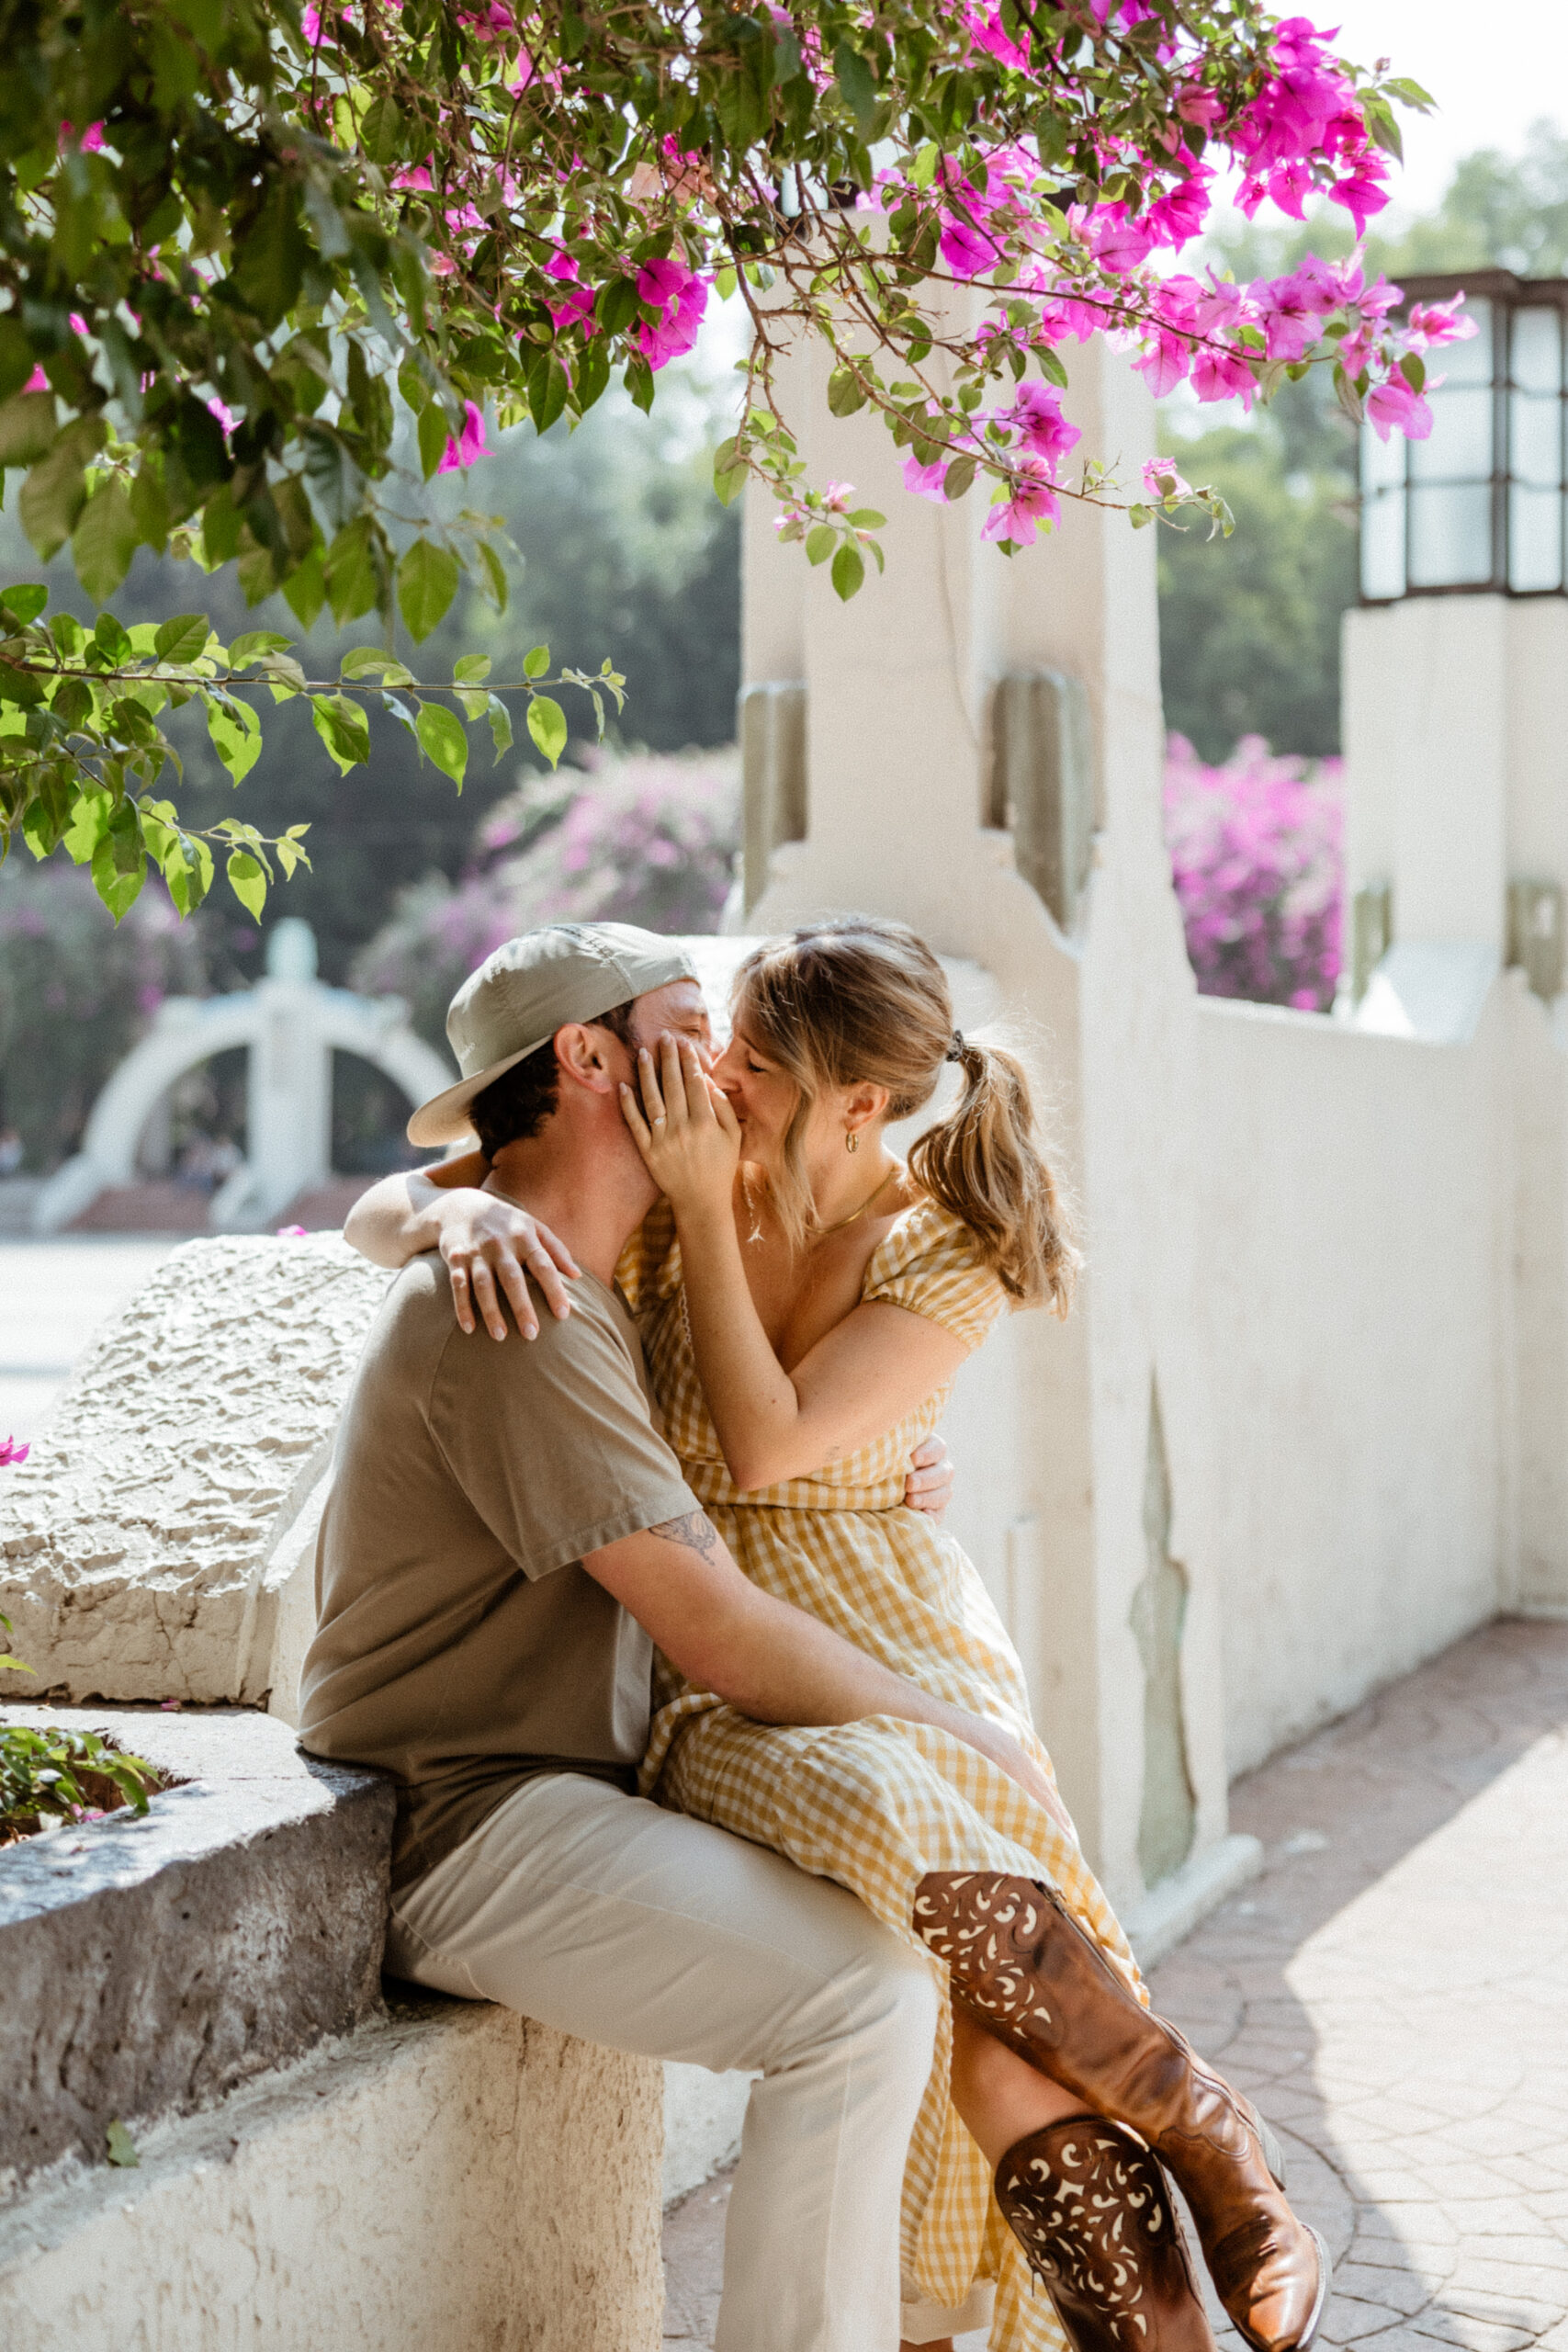 man and woman sitting down sharing a kiss under a tree of pink flowers